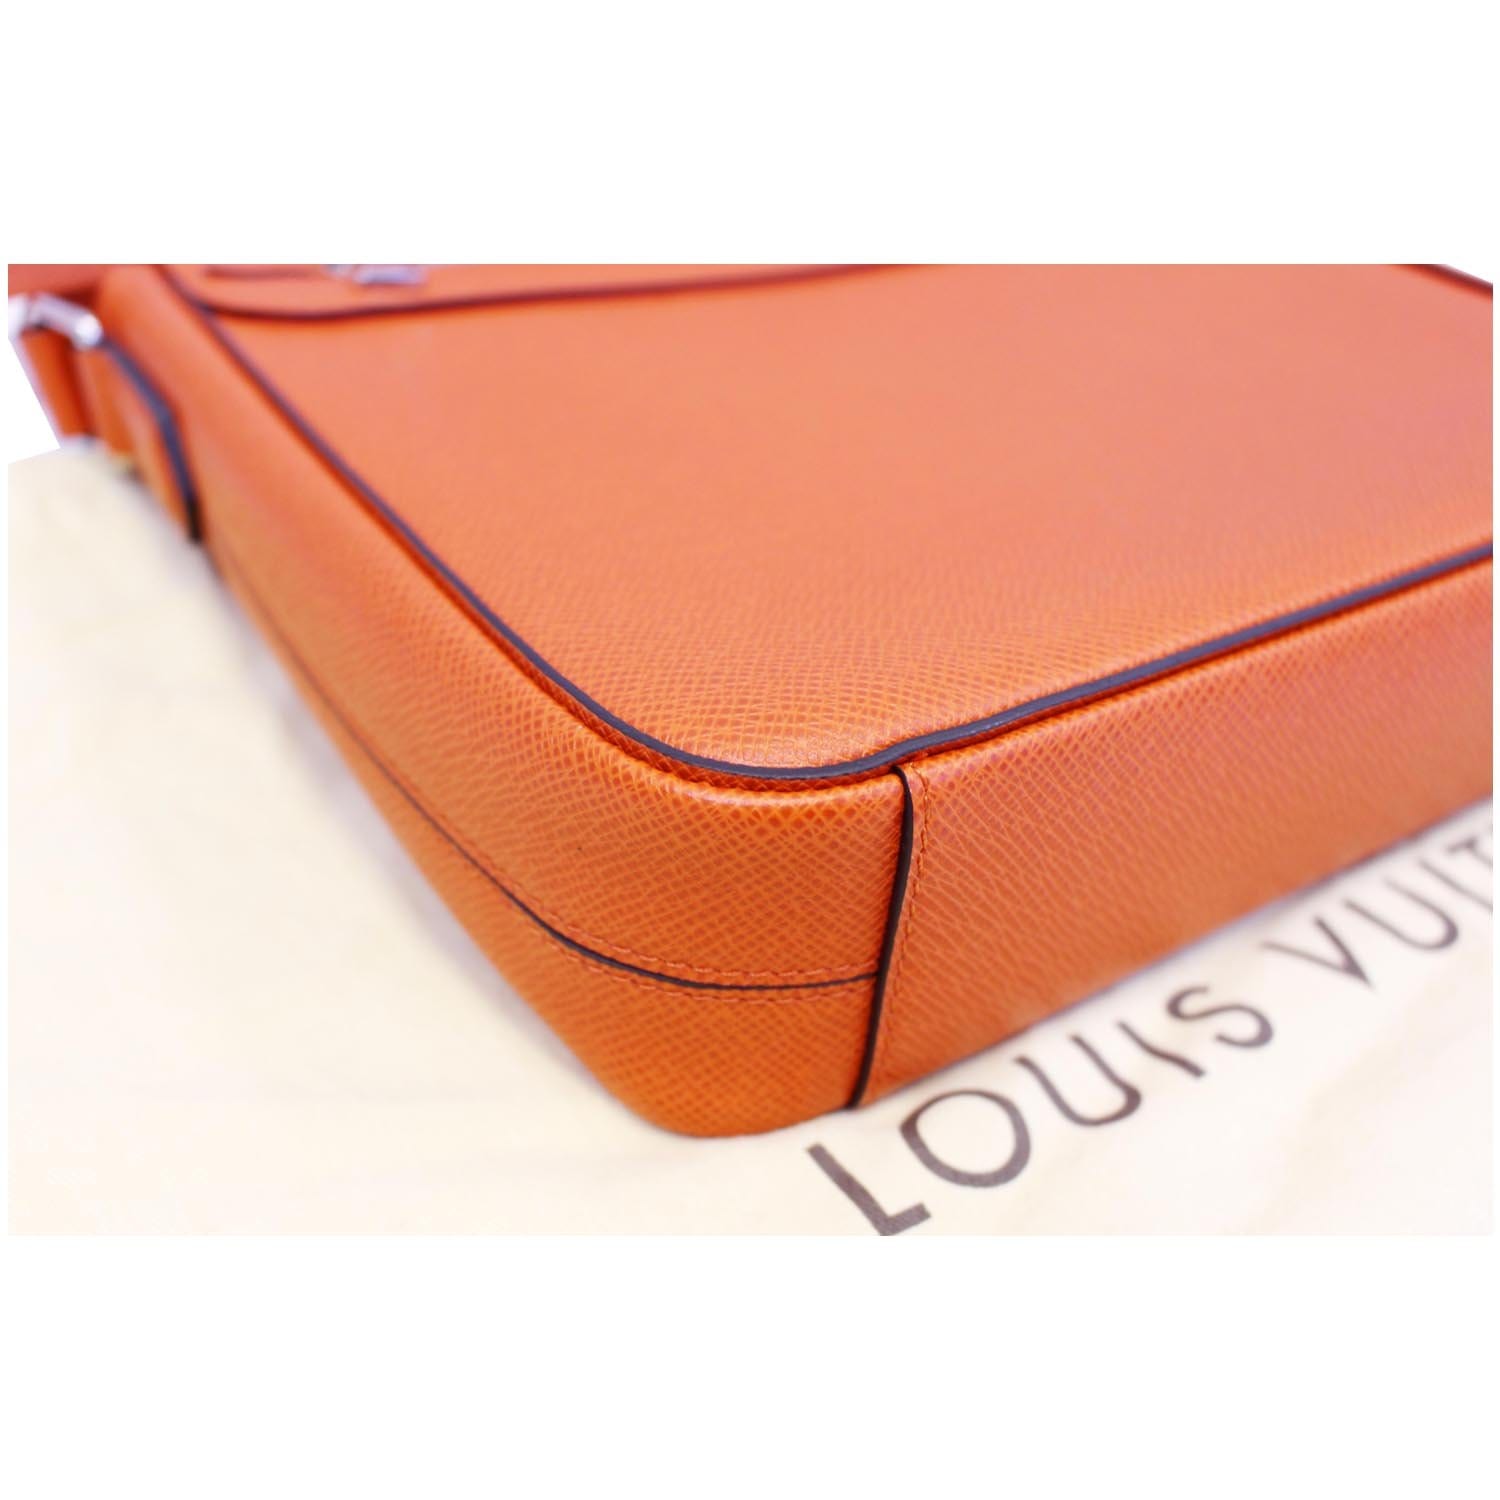 Louis Vuitton Orange Monogram Coated Canvas and Taiga Leather Taigarama Square Pouch Bag Charm Silver Hardware, 2021 (Like New)